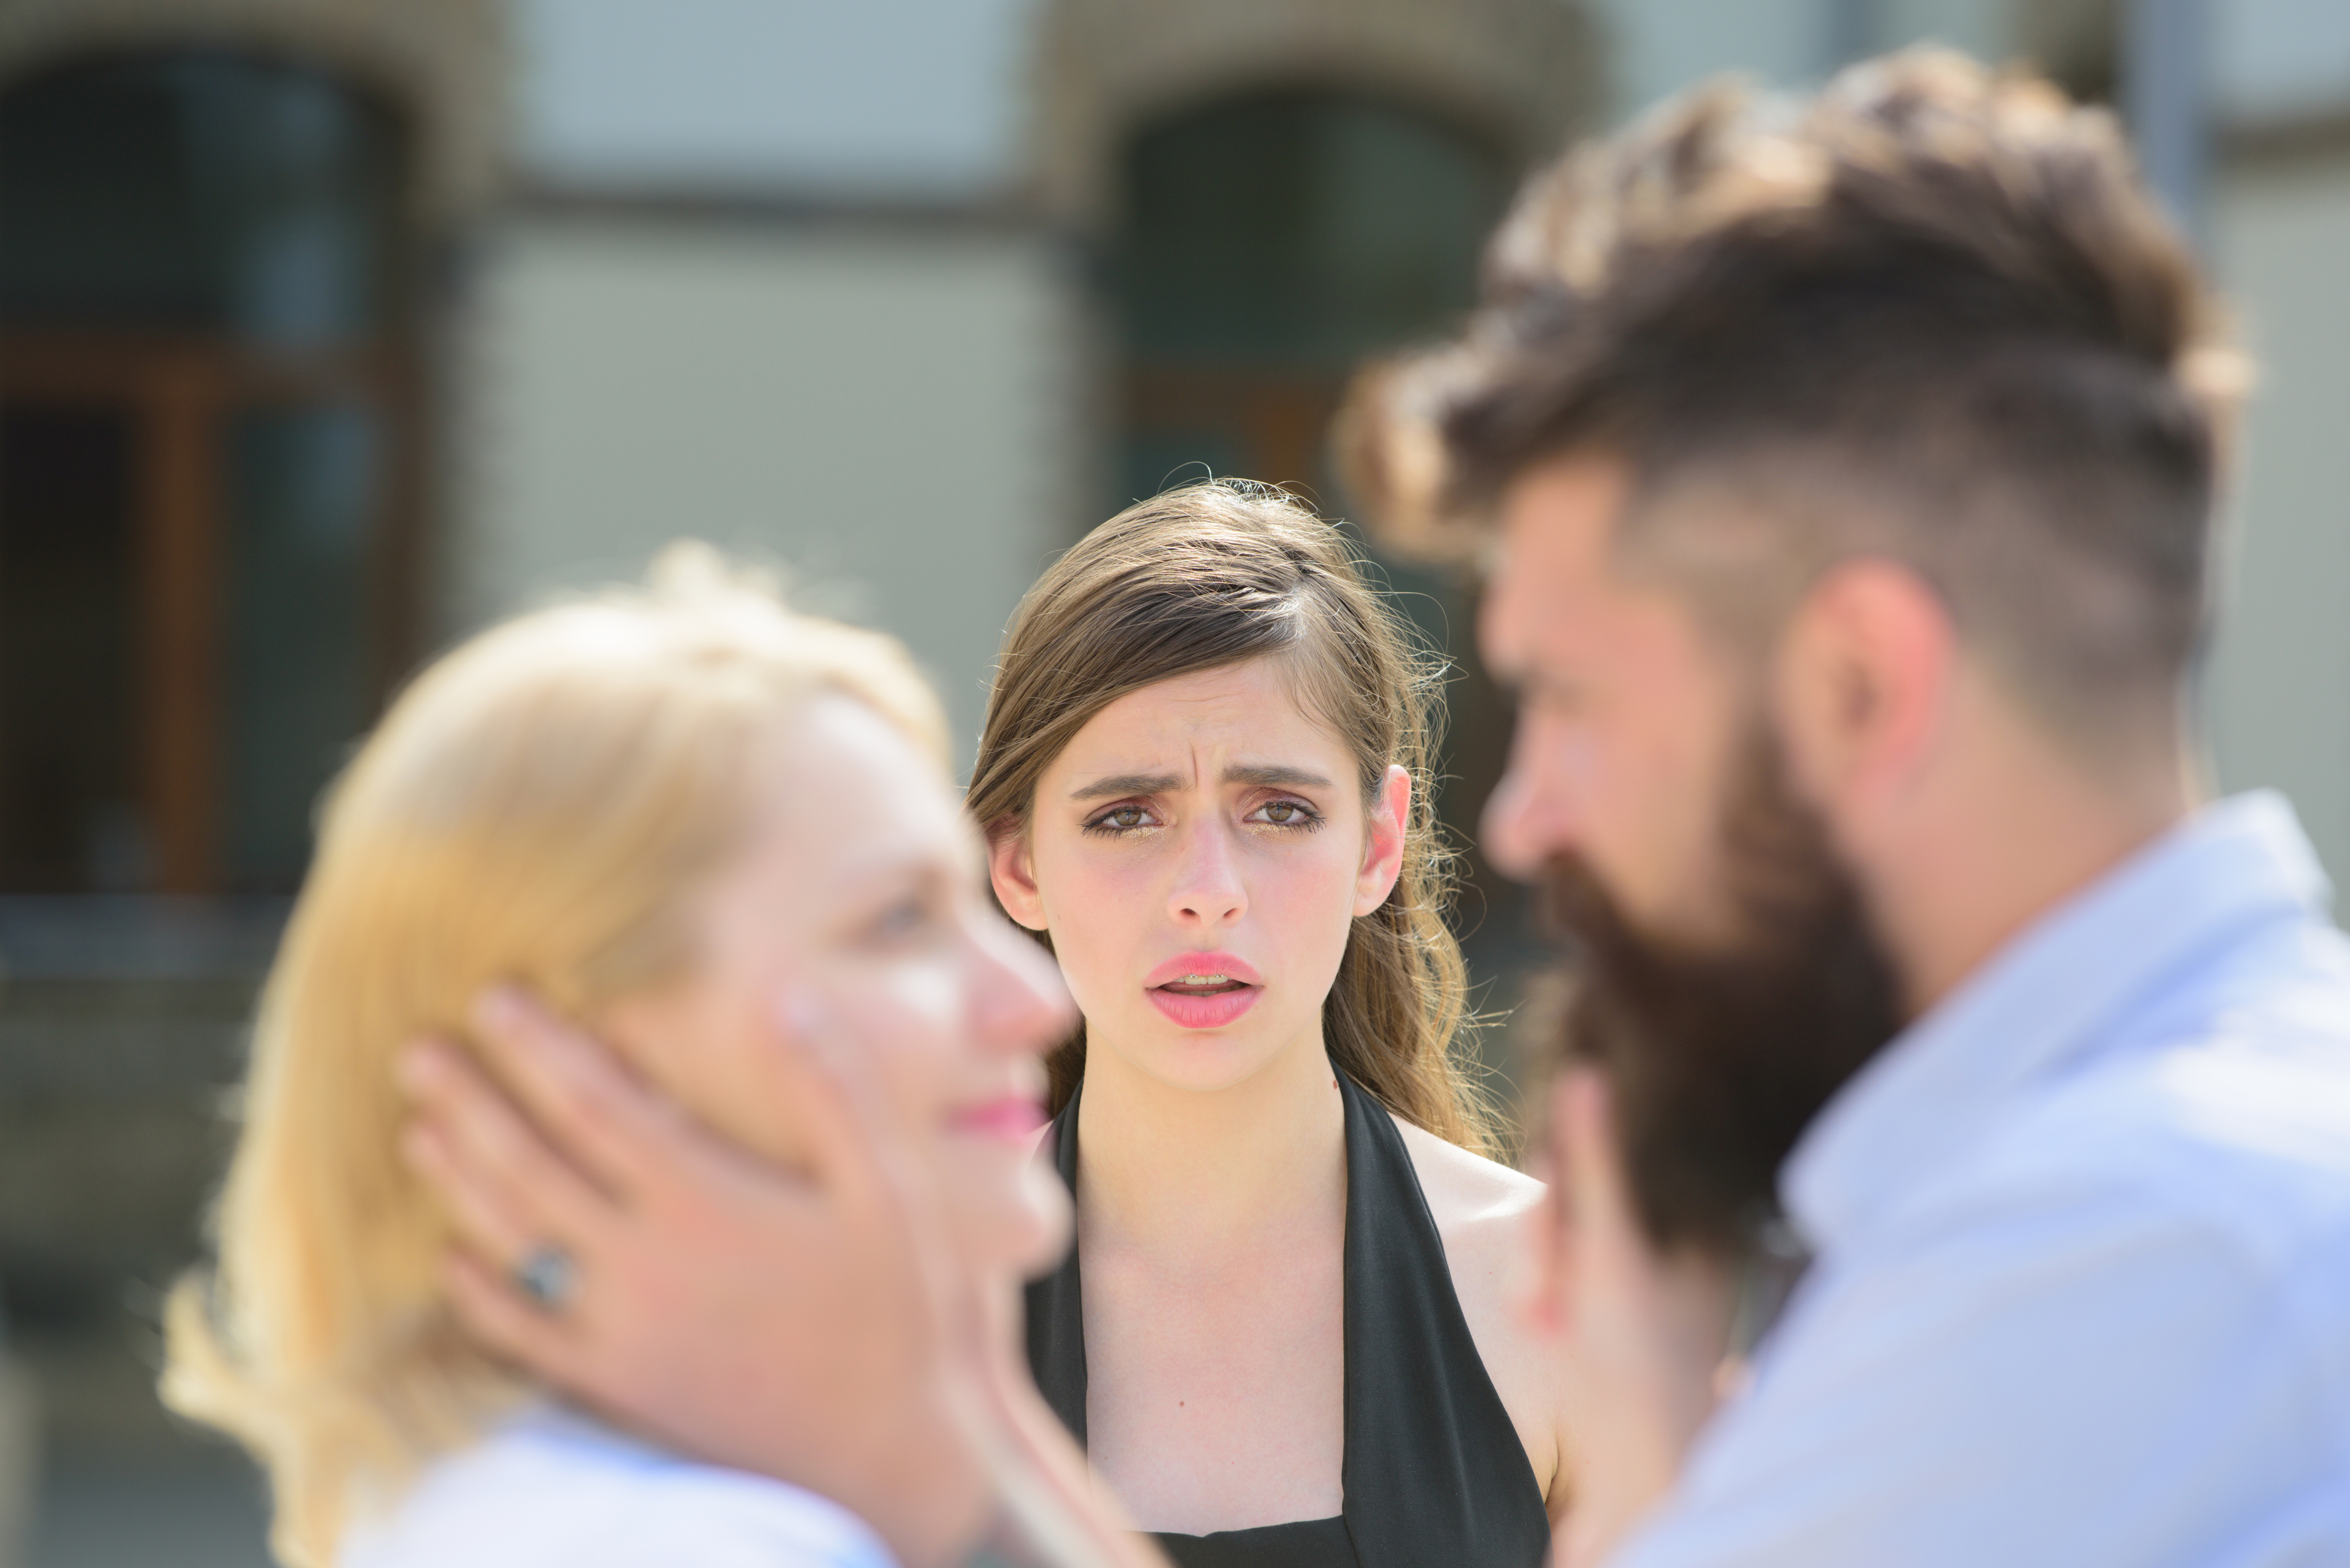 A heartbroken woman sees her boyfriend with another lady | Source: Shutterstock